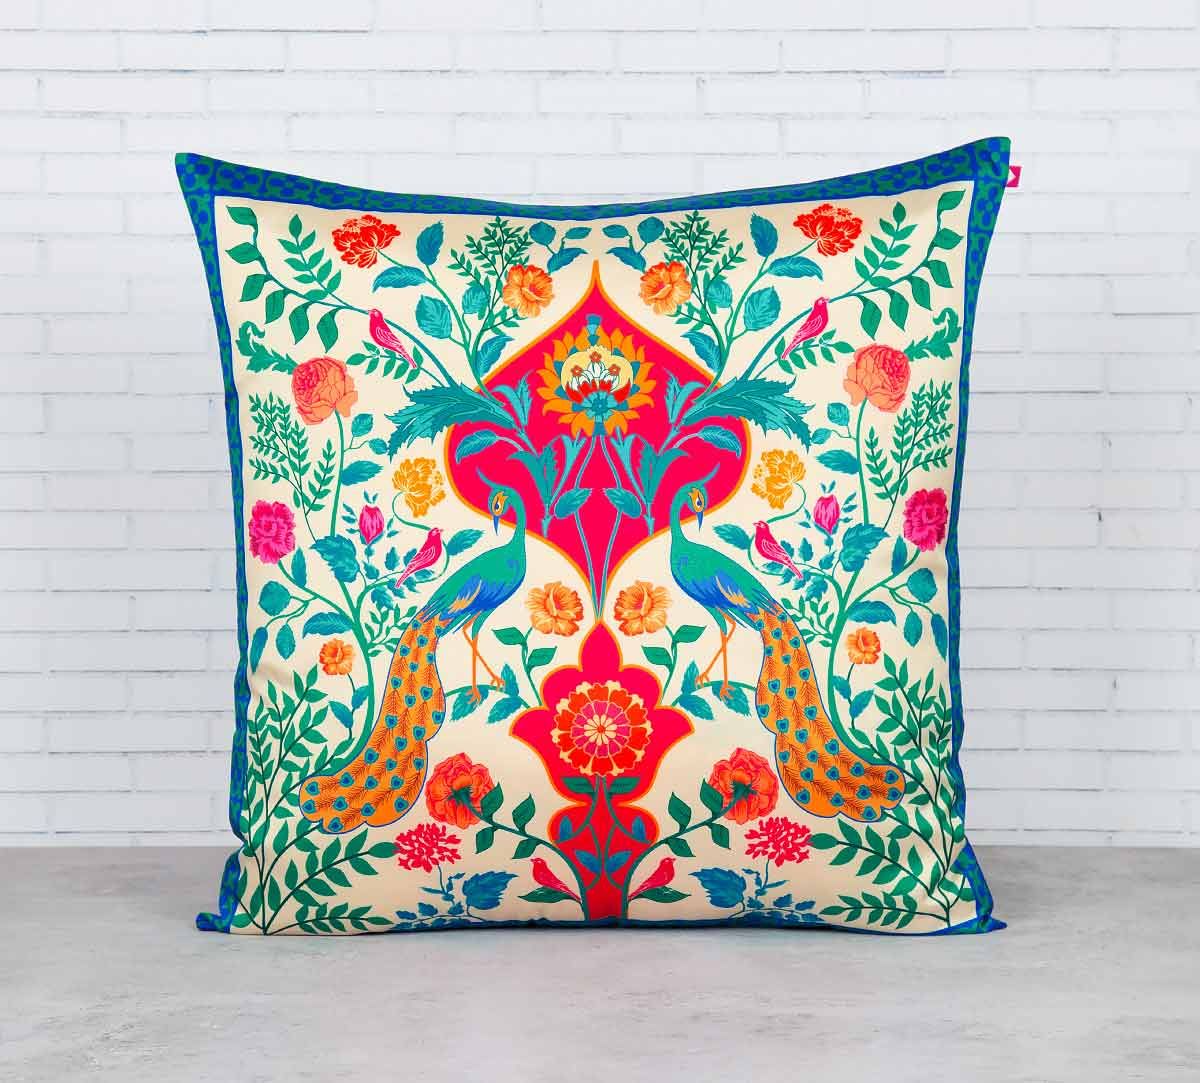 India Circus The Bright Birds and Floral Burst Blended Taf Silk Cushion Cover